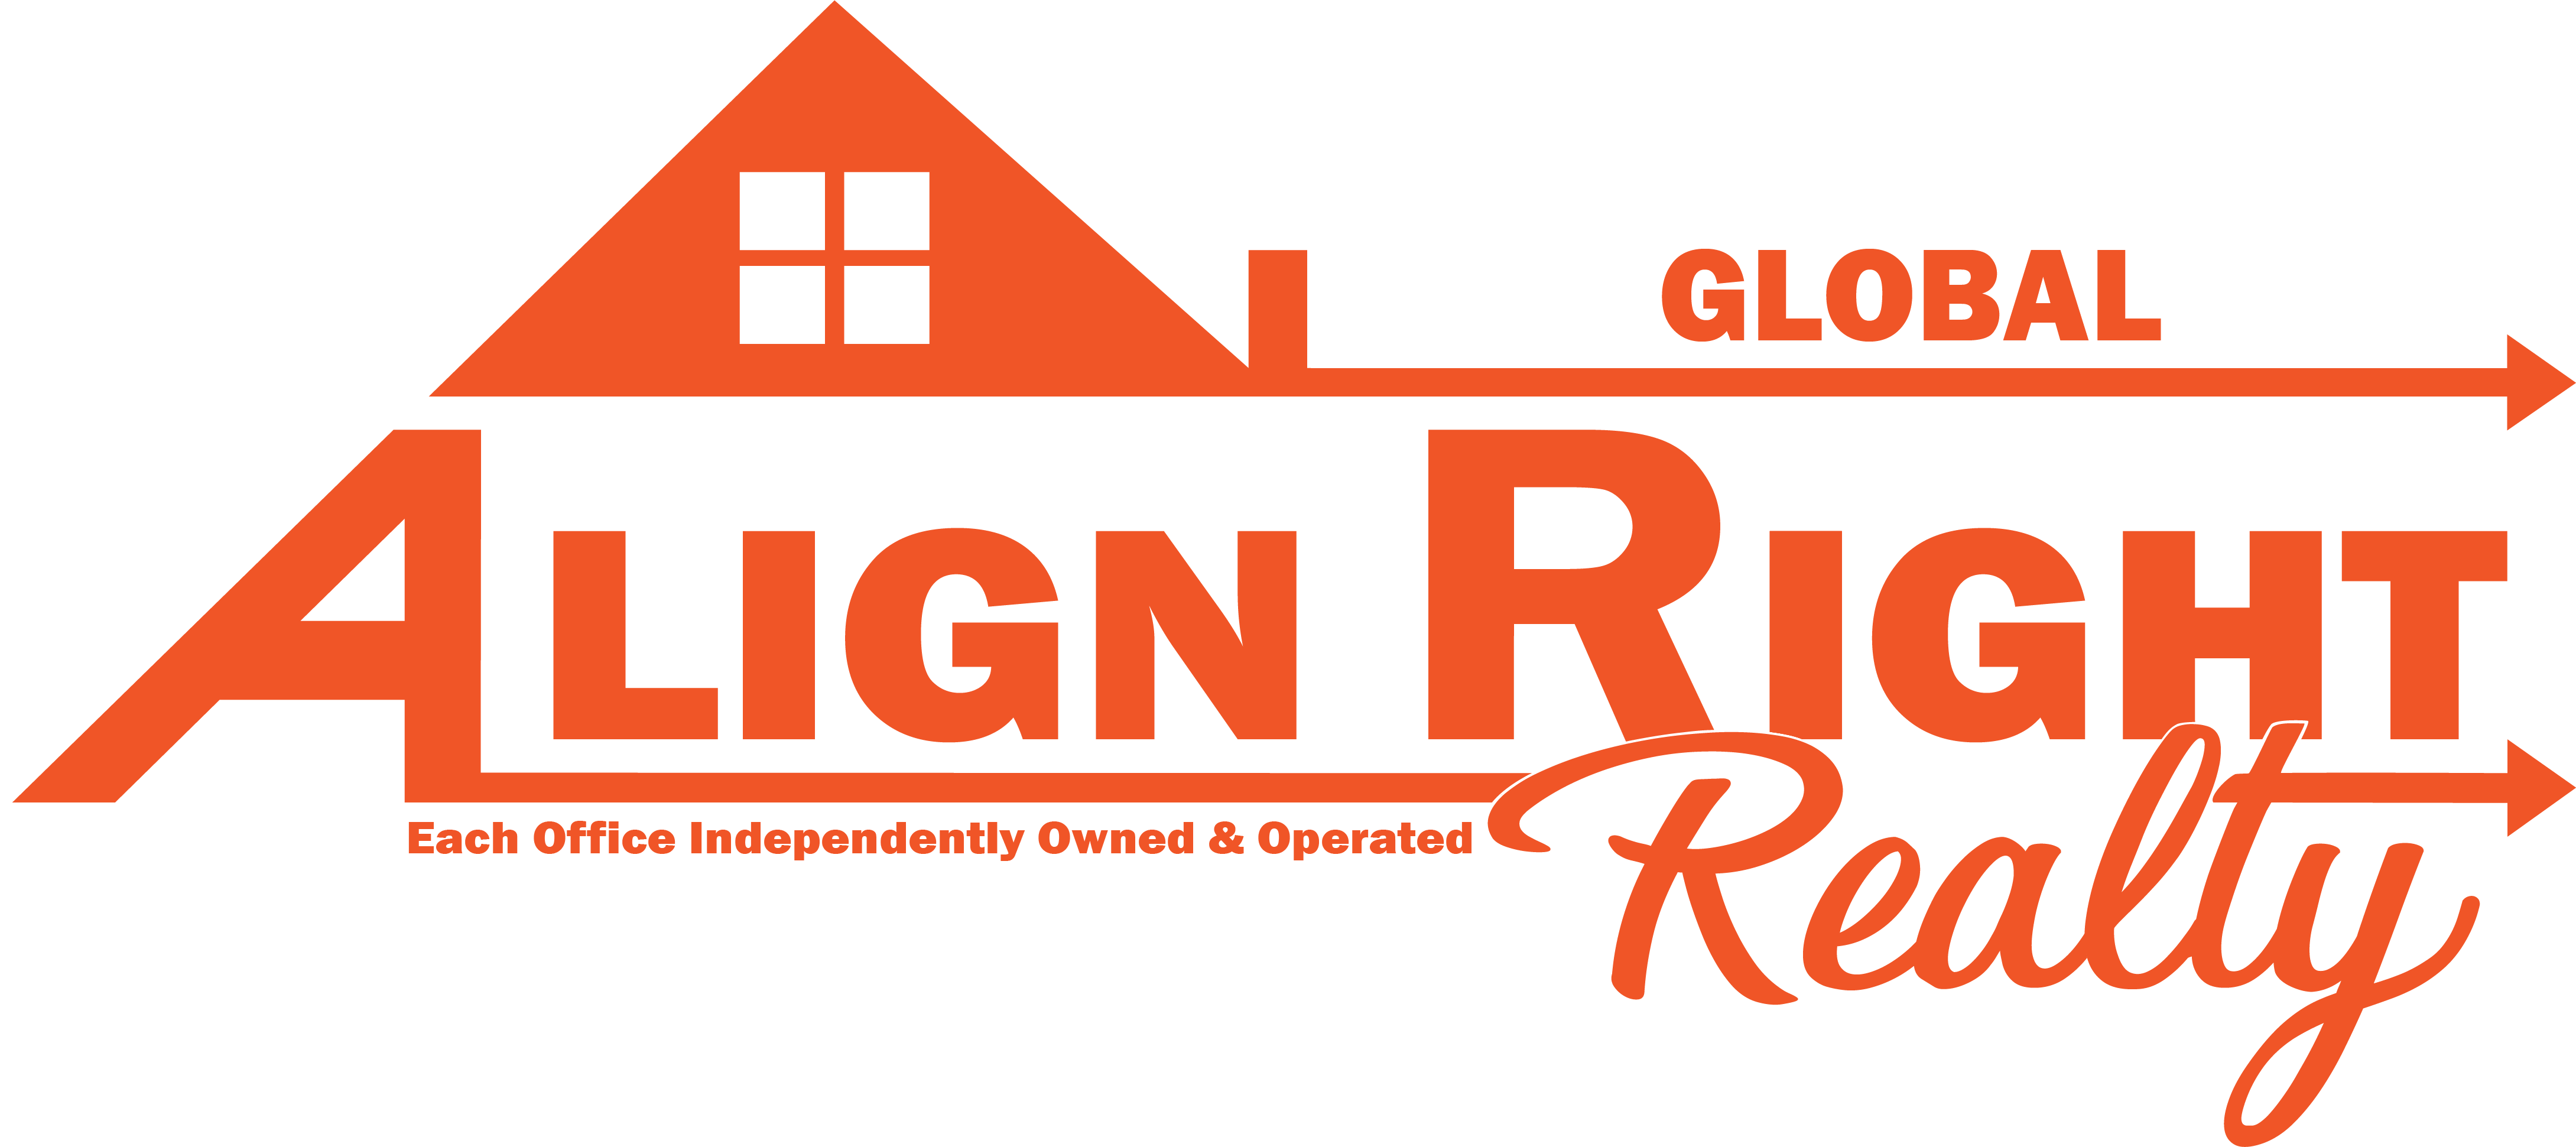 Align Right Realty Global